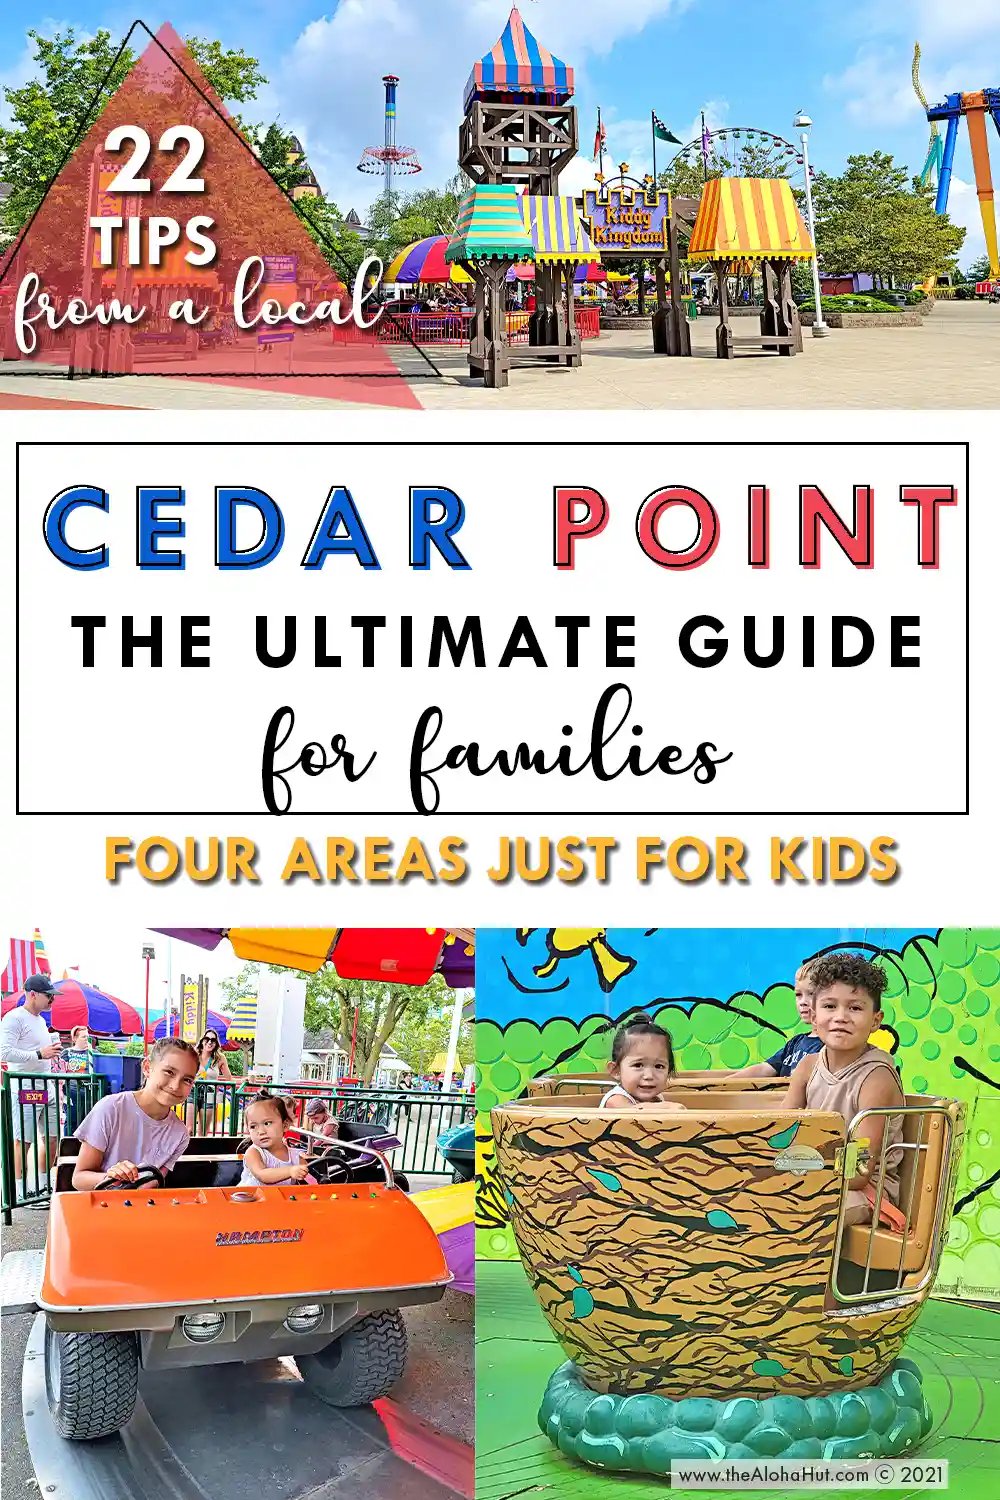 Cedar Point the Ultimate Guide for Families - Tips & Tricks - Kiddy Kingdom